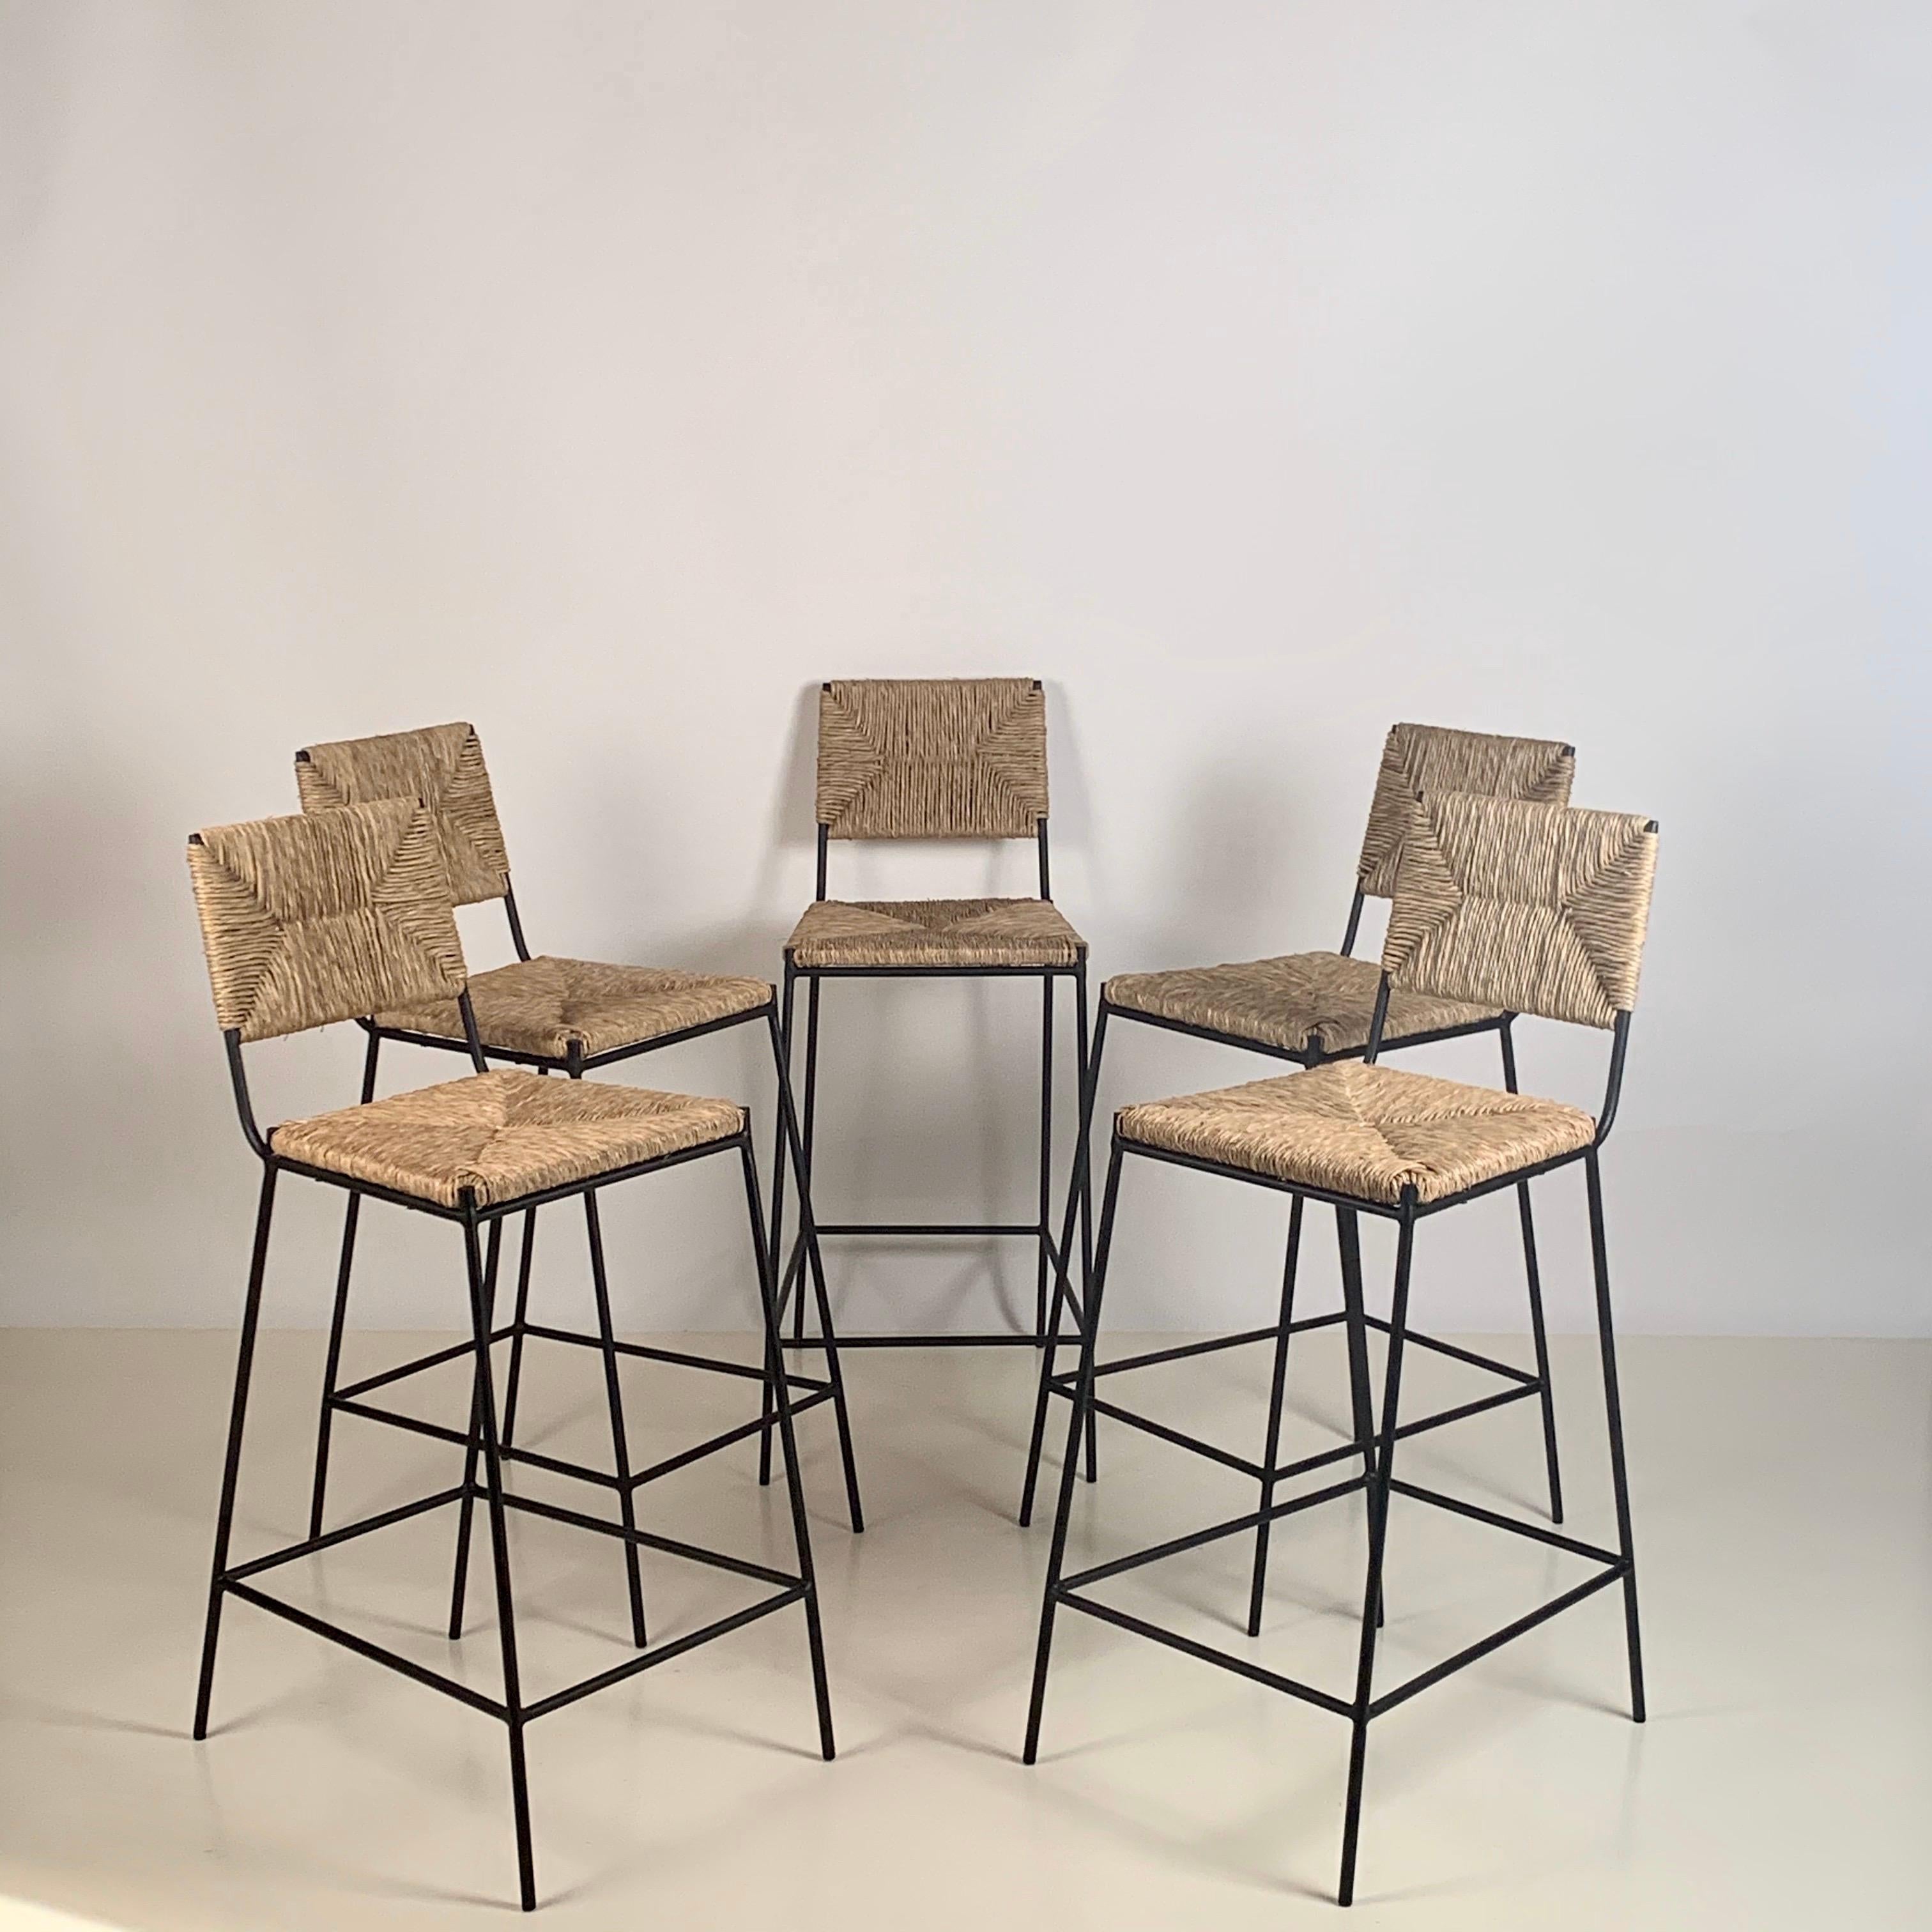 Set of 5 'Campagne' counter height stools by Design Frères.

Chic combination of slender but sturdy and stabile powder-coated steel frames with handwoven rush seats and backs. Extra support under the rush seat for durability. Durable plastic caps